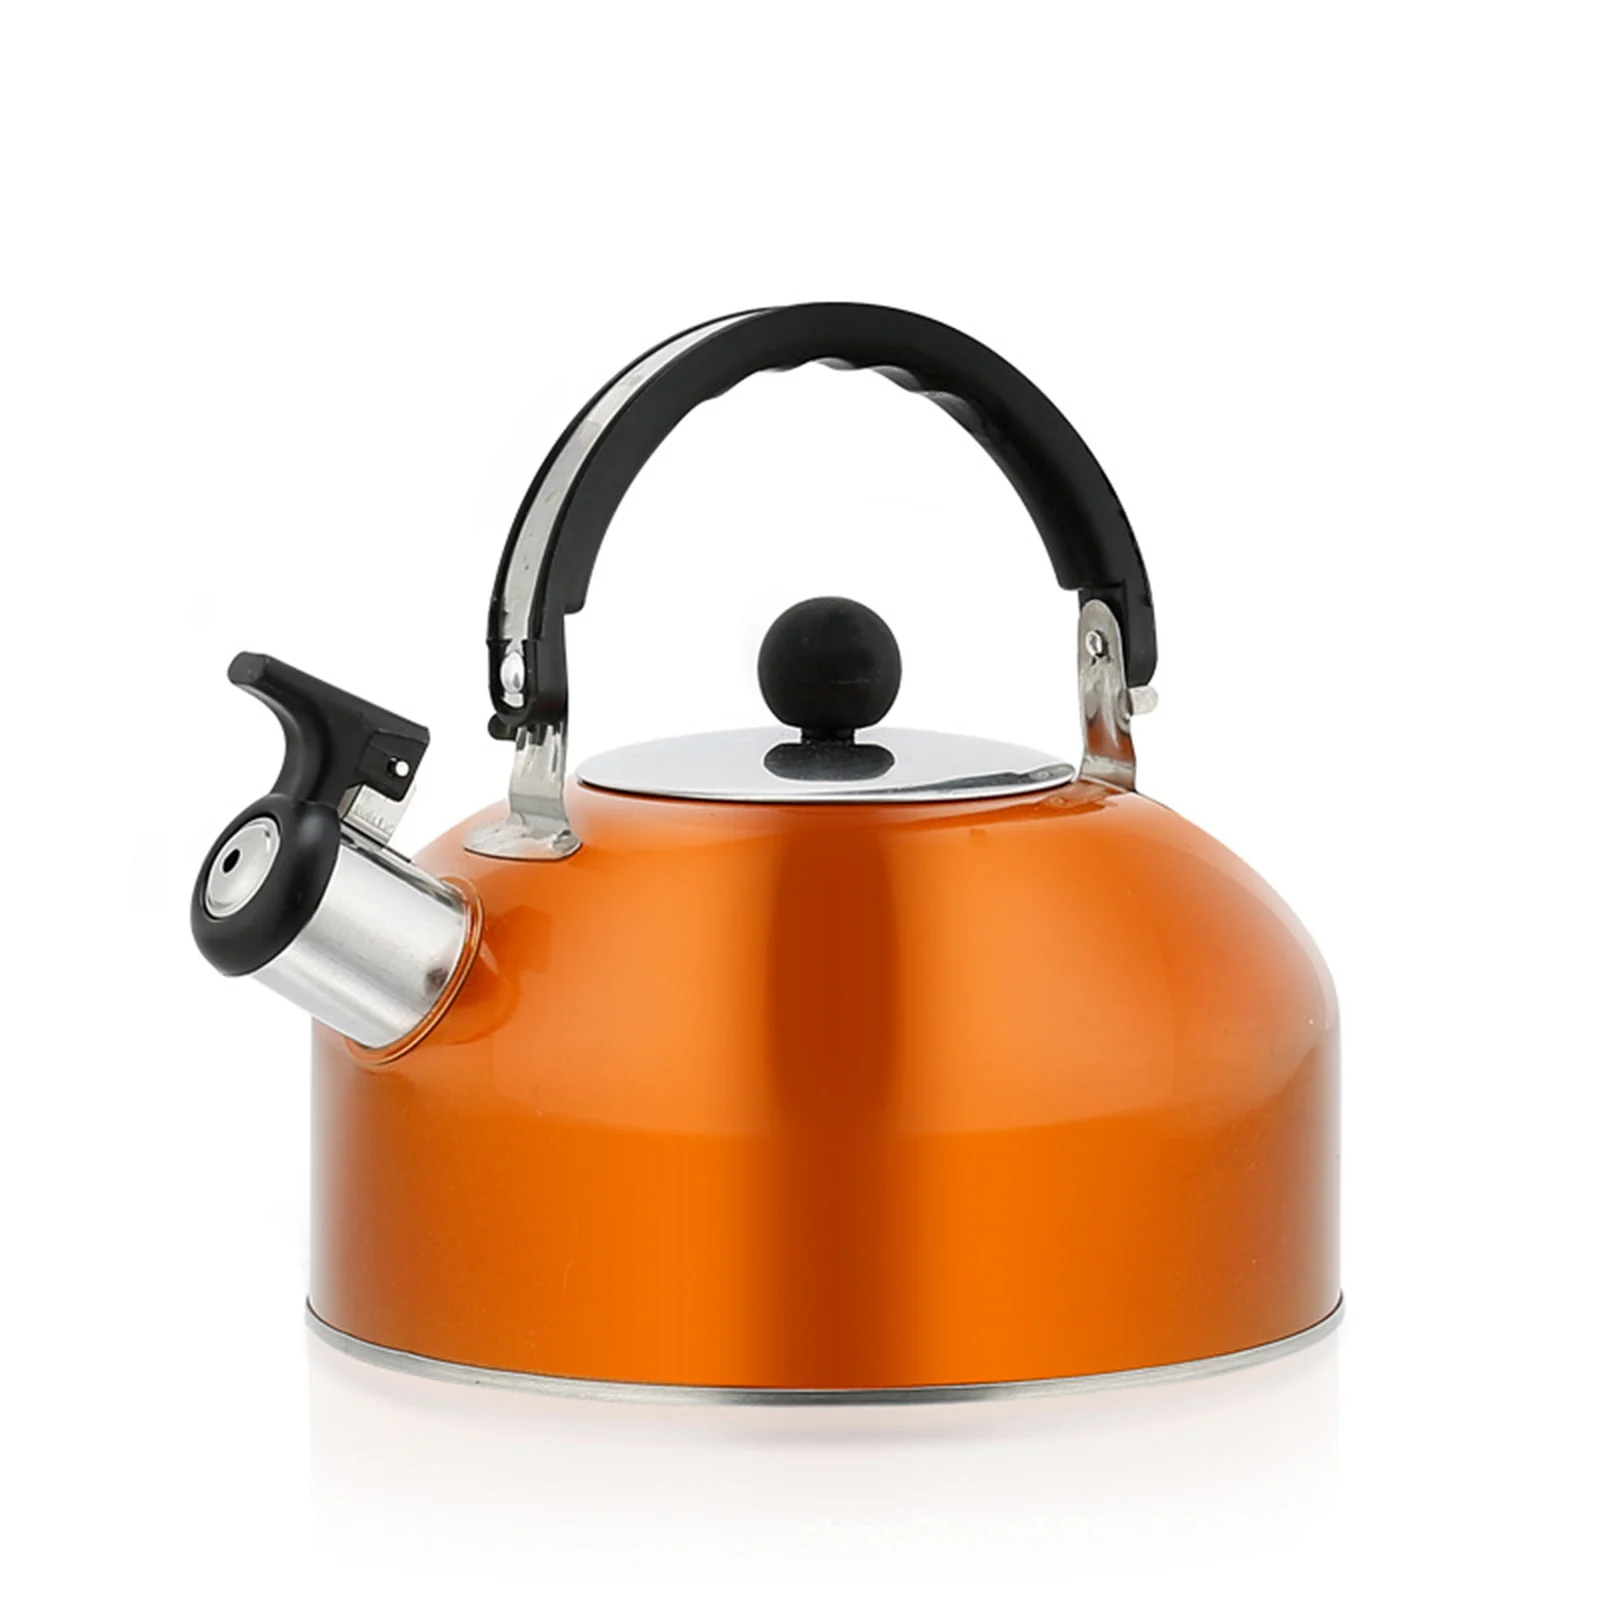 

3L Camping Whistling Kettle Stainless Steel Induction Cooker Gas Stove Outdoor Camping Teapot Boil Water Teakettle